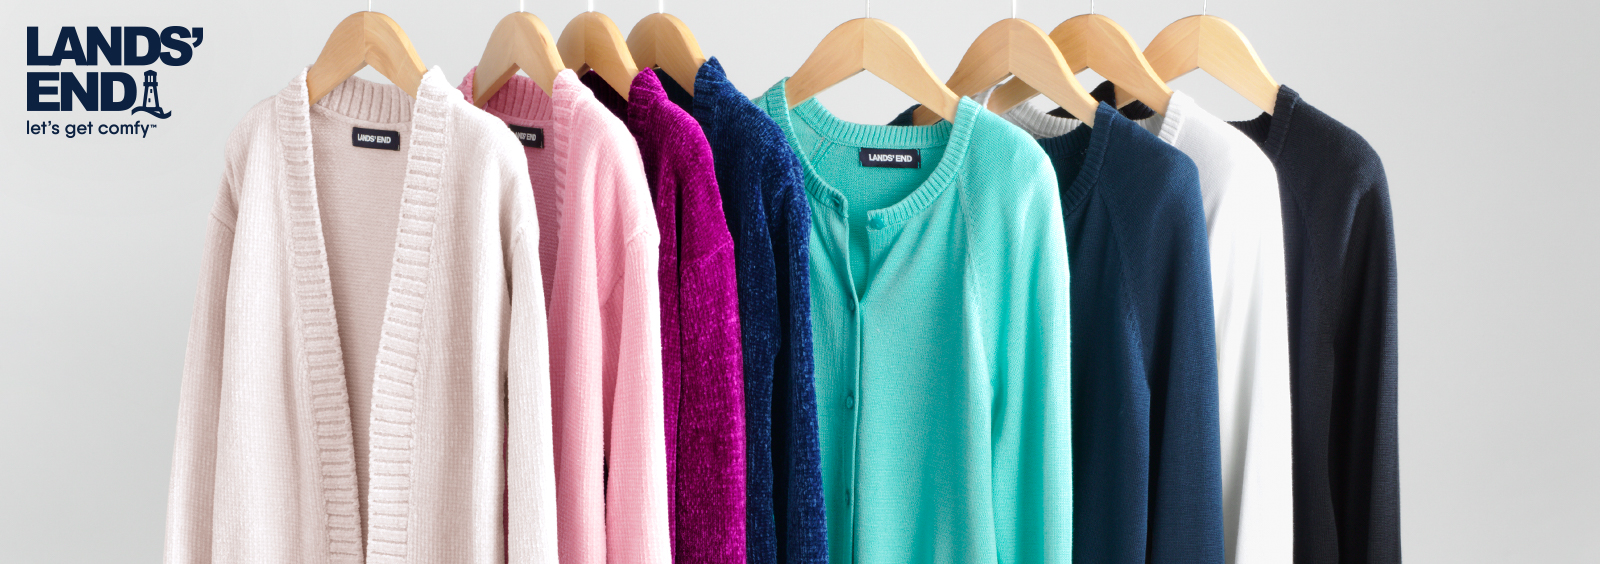 Girls' Cardigan Sweaters for Lounging Around the House on Weekends